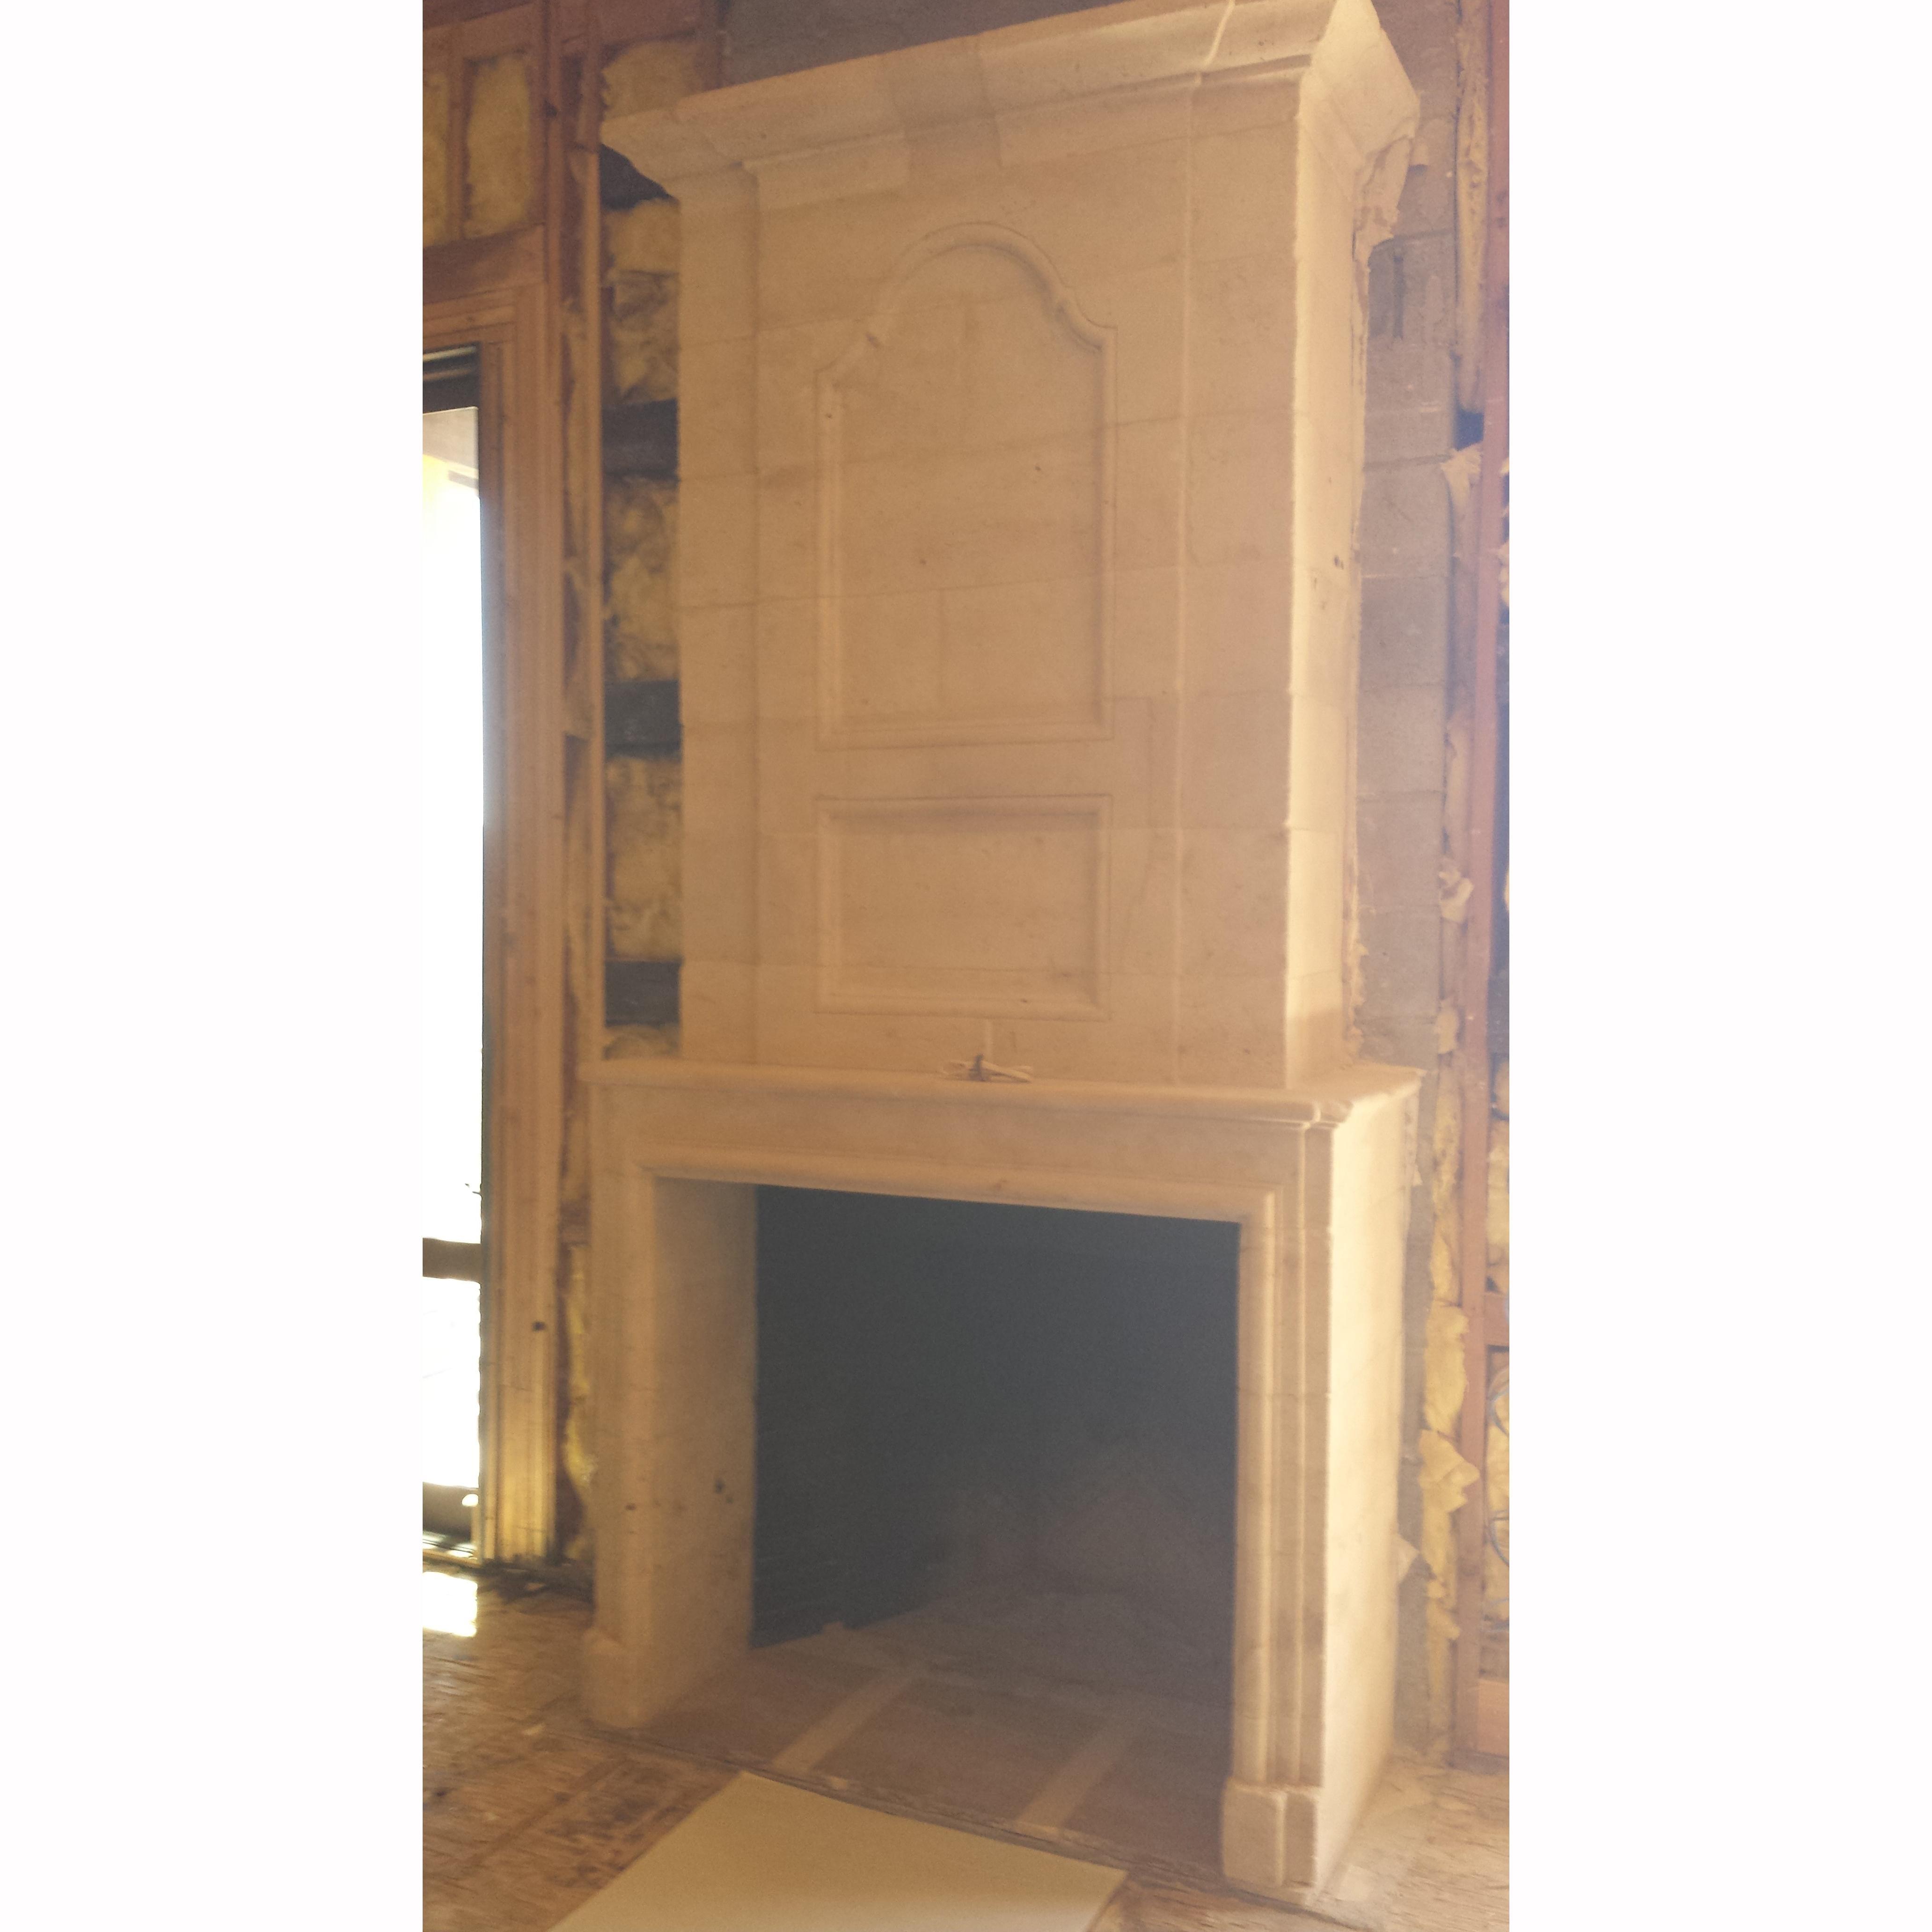 Antique Limestone Fireplace with Cheminee, c.1750 In Fair Condition For Sale In Napa, CA